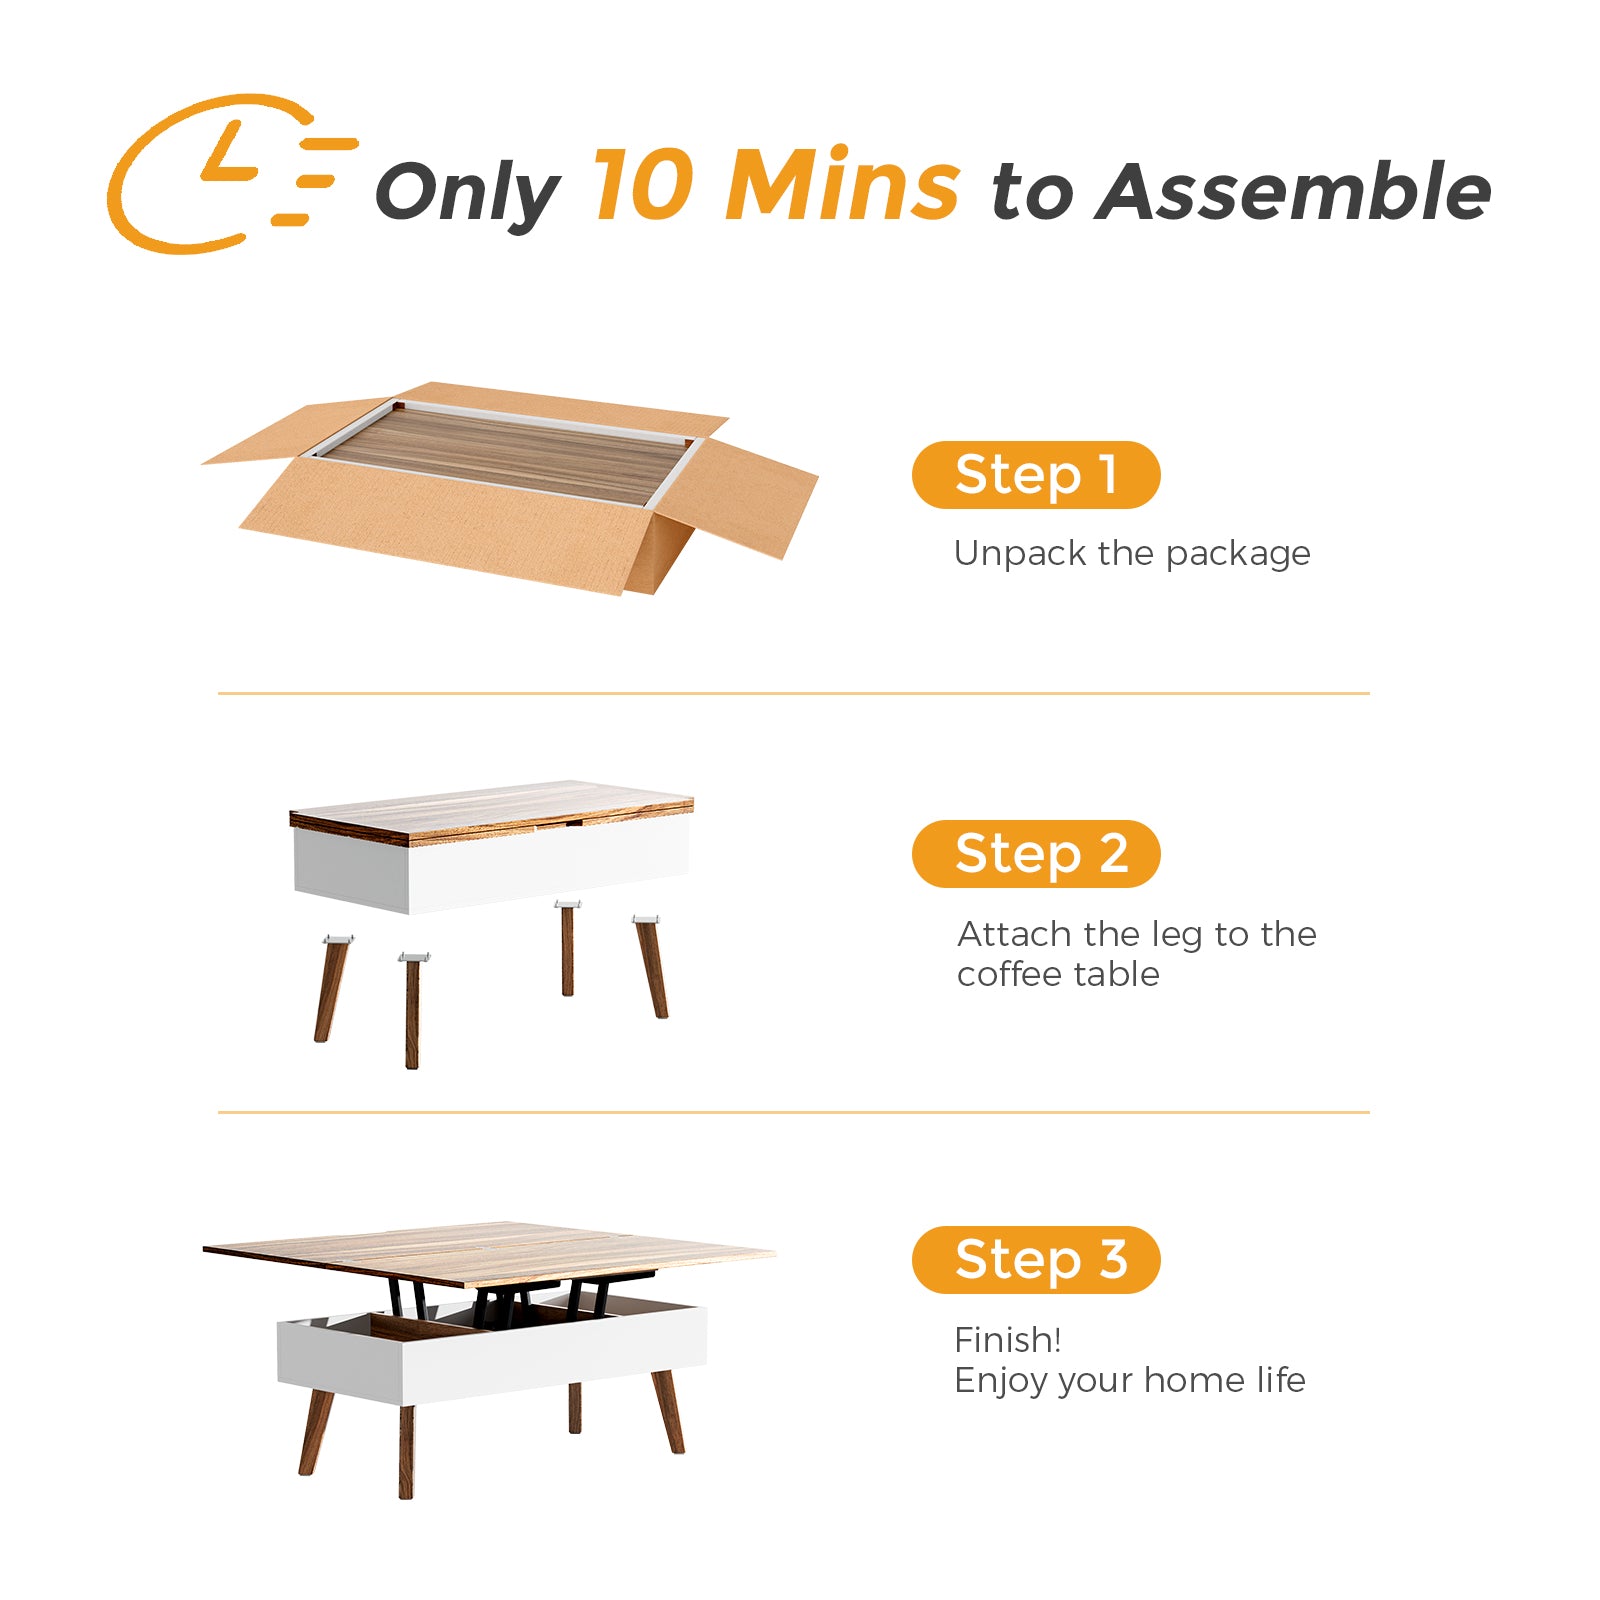 Bidiso 3 in 1 Lift Top Coffee Table, Ten Minutes Install Multifunction Coffee Table, Coffee Table Converts to Dining Table, Lift Top Dining Table Work Desk with Storage